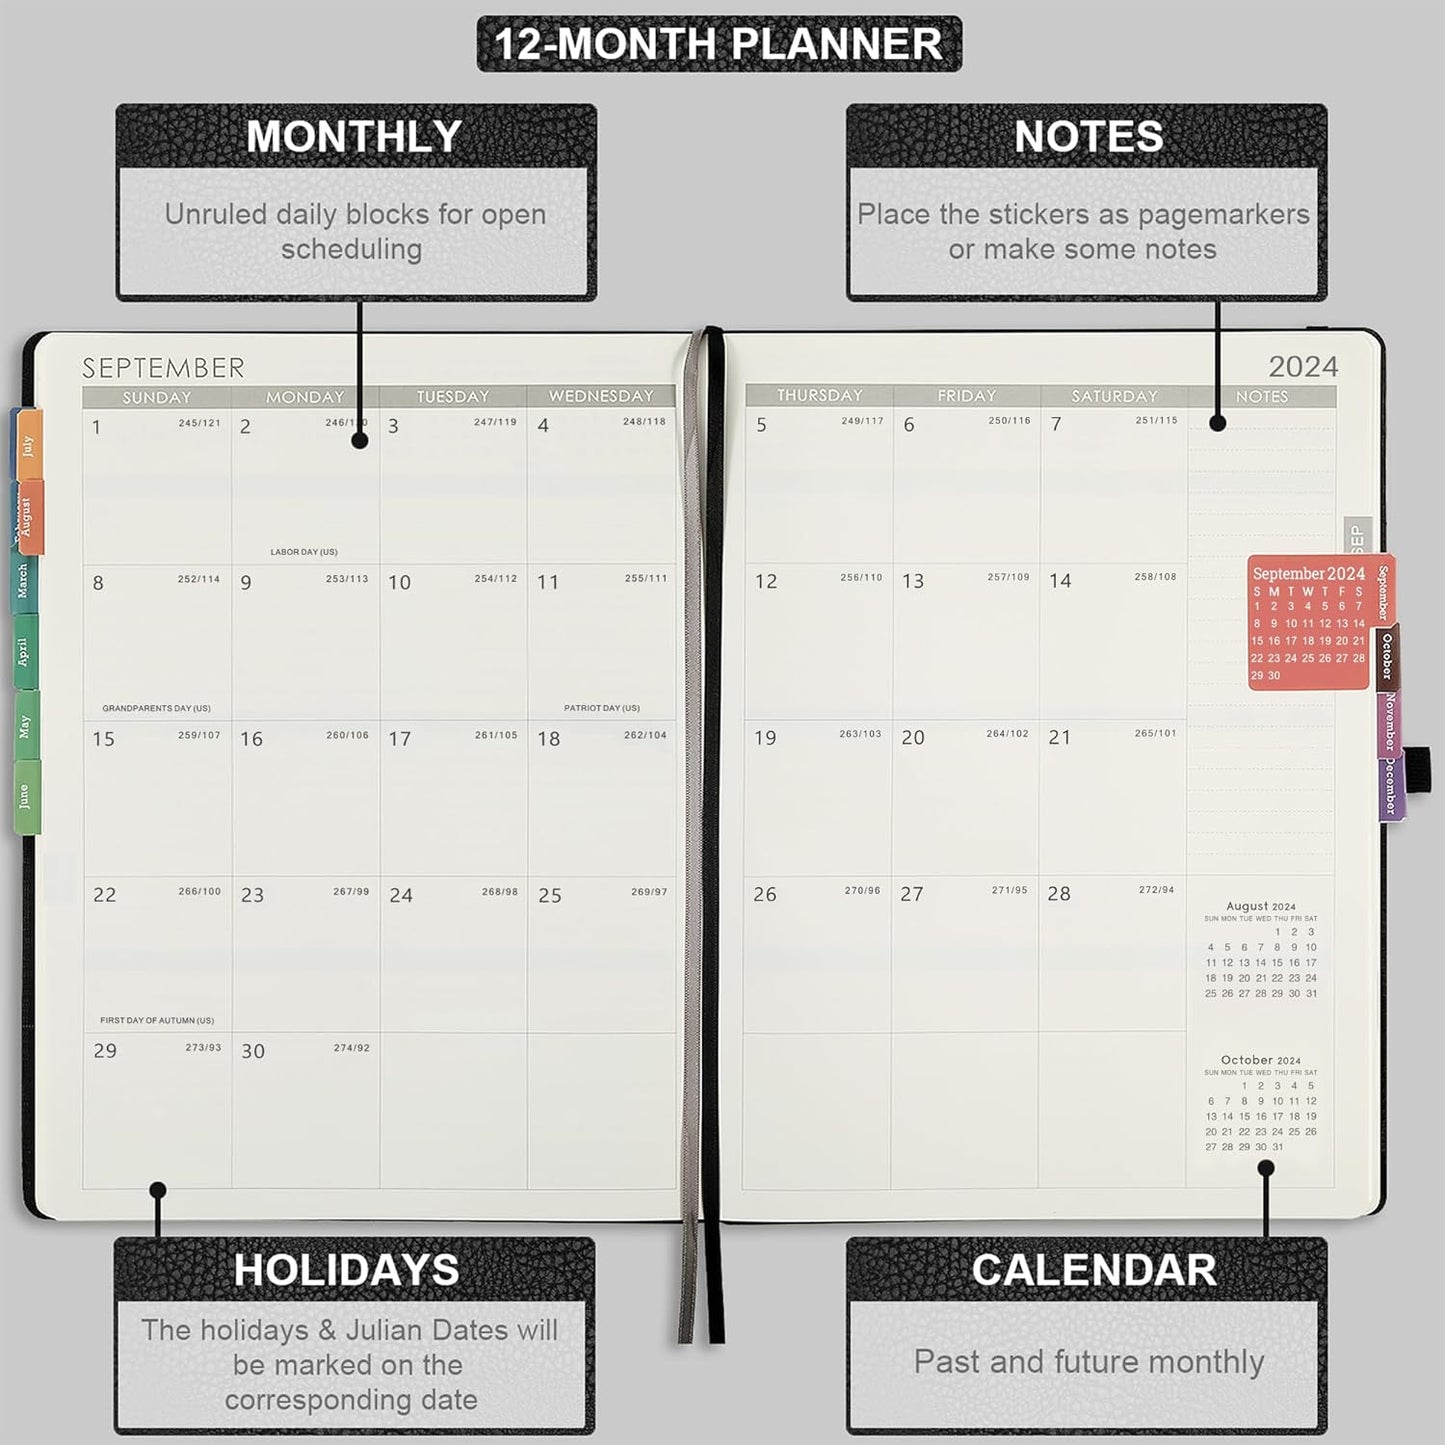 2024-2025 Planner - Weekly Monthly Planner 2024-2025, JUL 2024 - JUN 2025, 8.5" X 11", Leather Cover Planner 2024-2025 with Thick Paper, Back Pocket with Notes Pages - Black